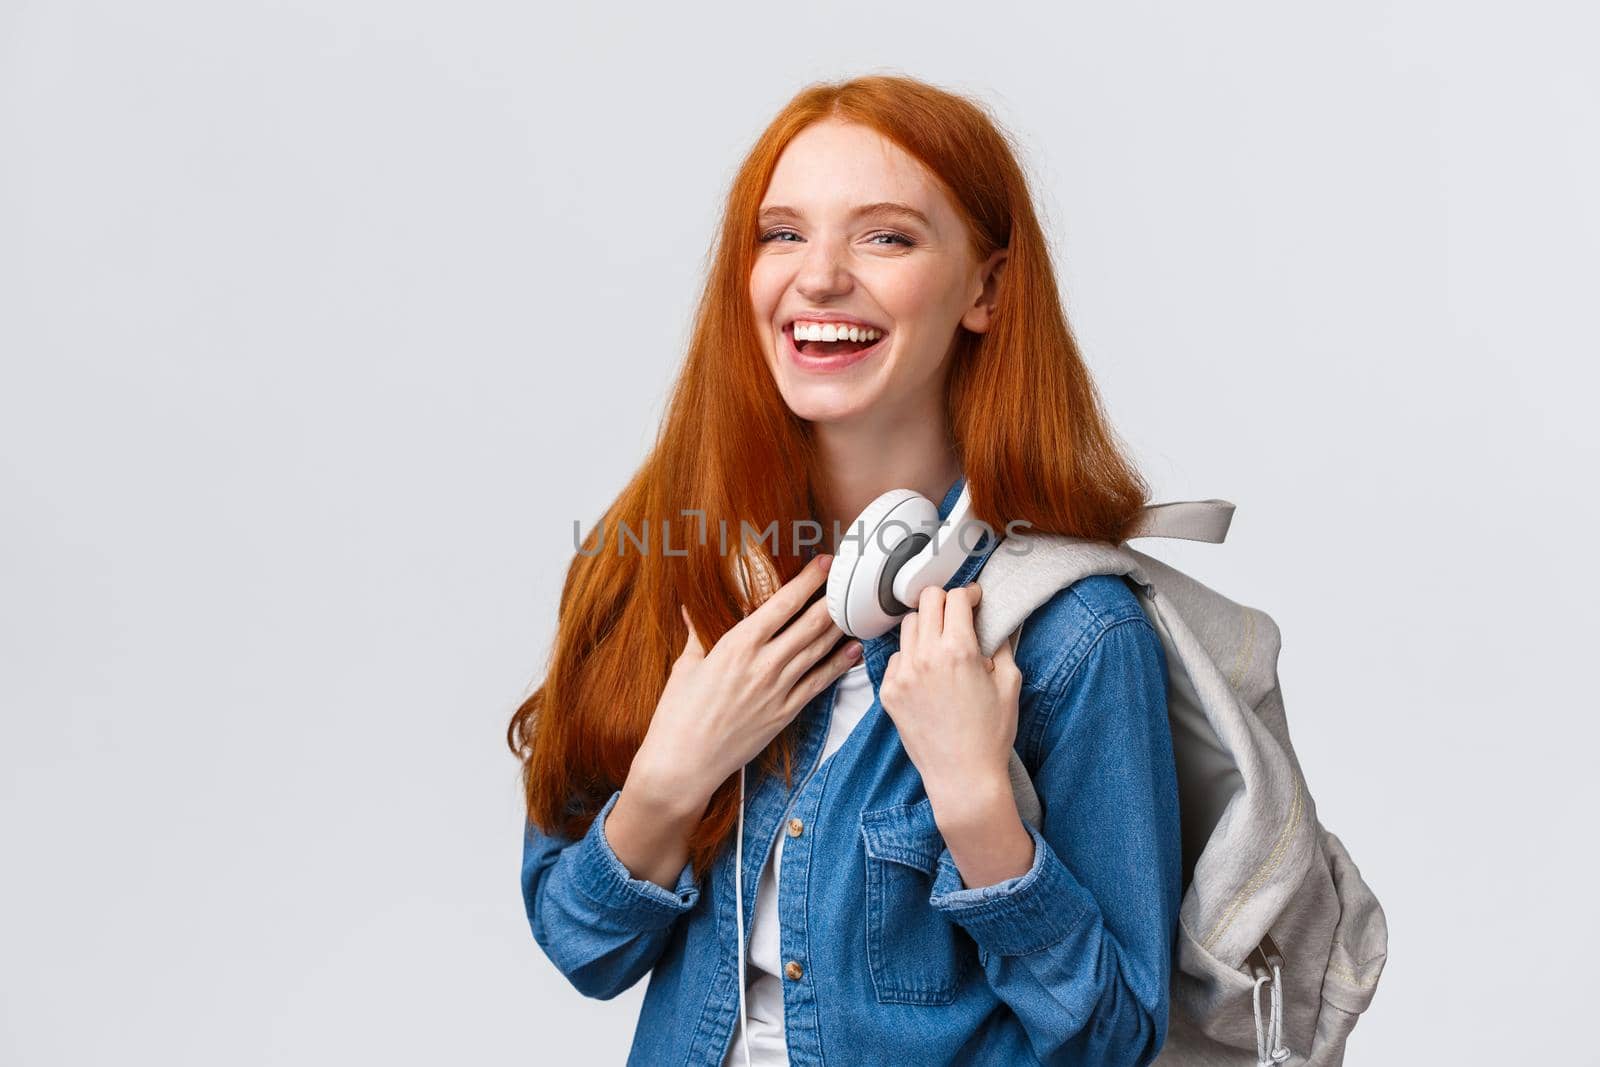 Education, student life and happiness concept. Cheerful good-looking redhead caucasian girl, college student with backpack and headphones over neck laughing smiling at camera.